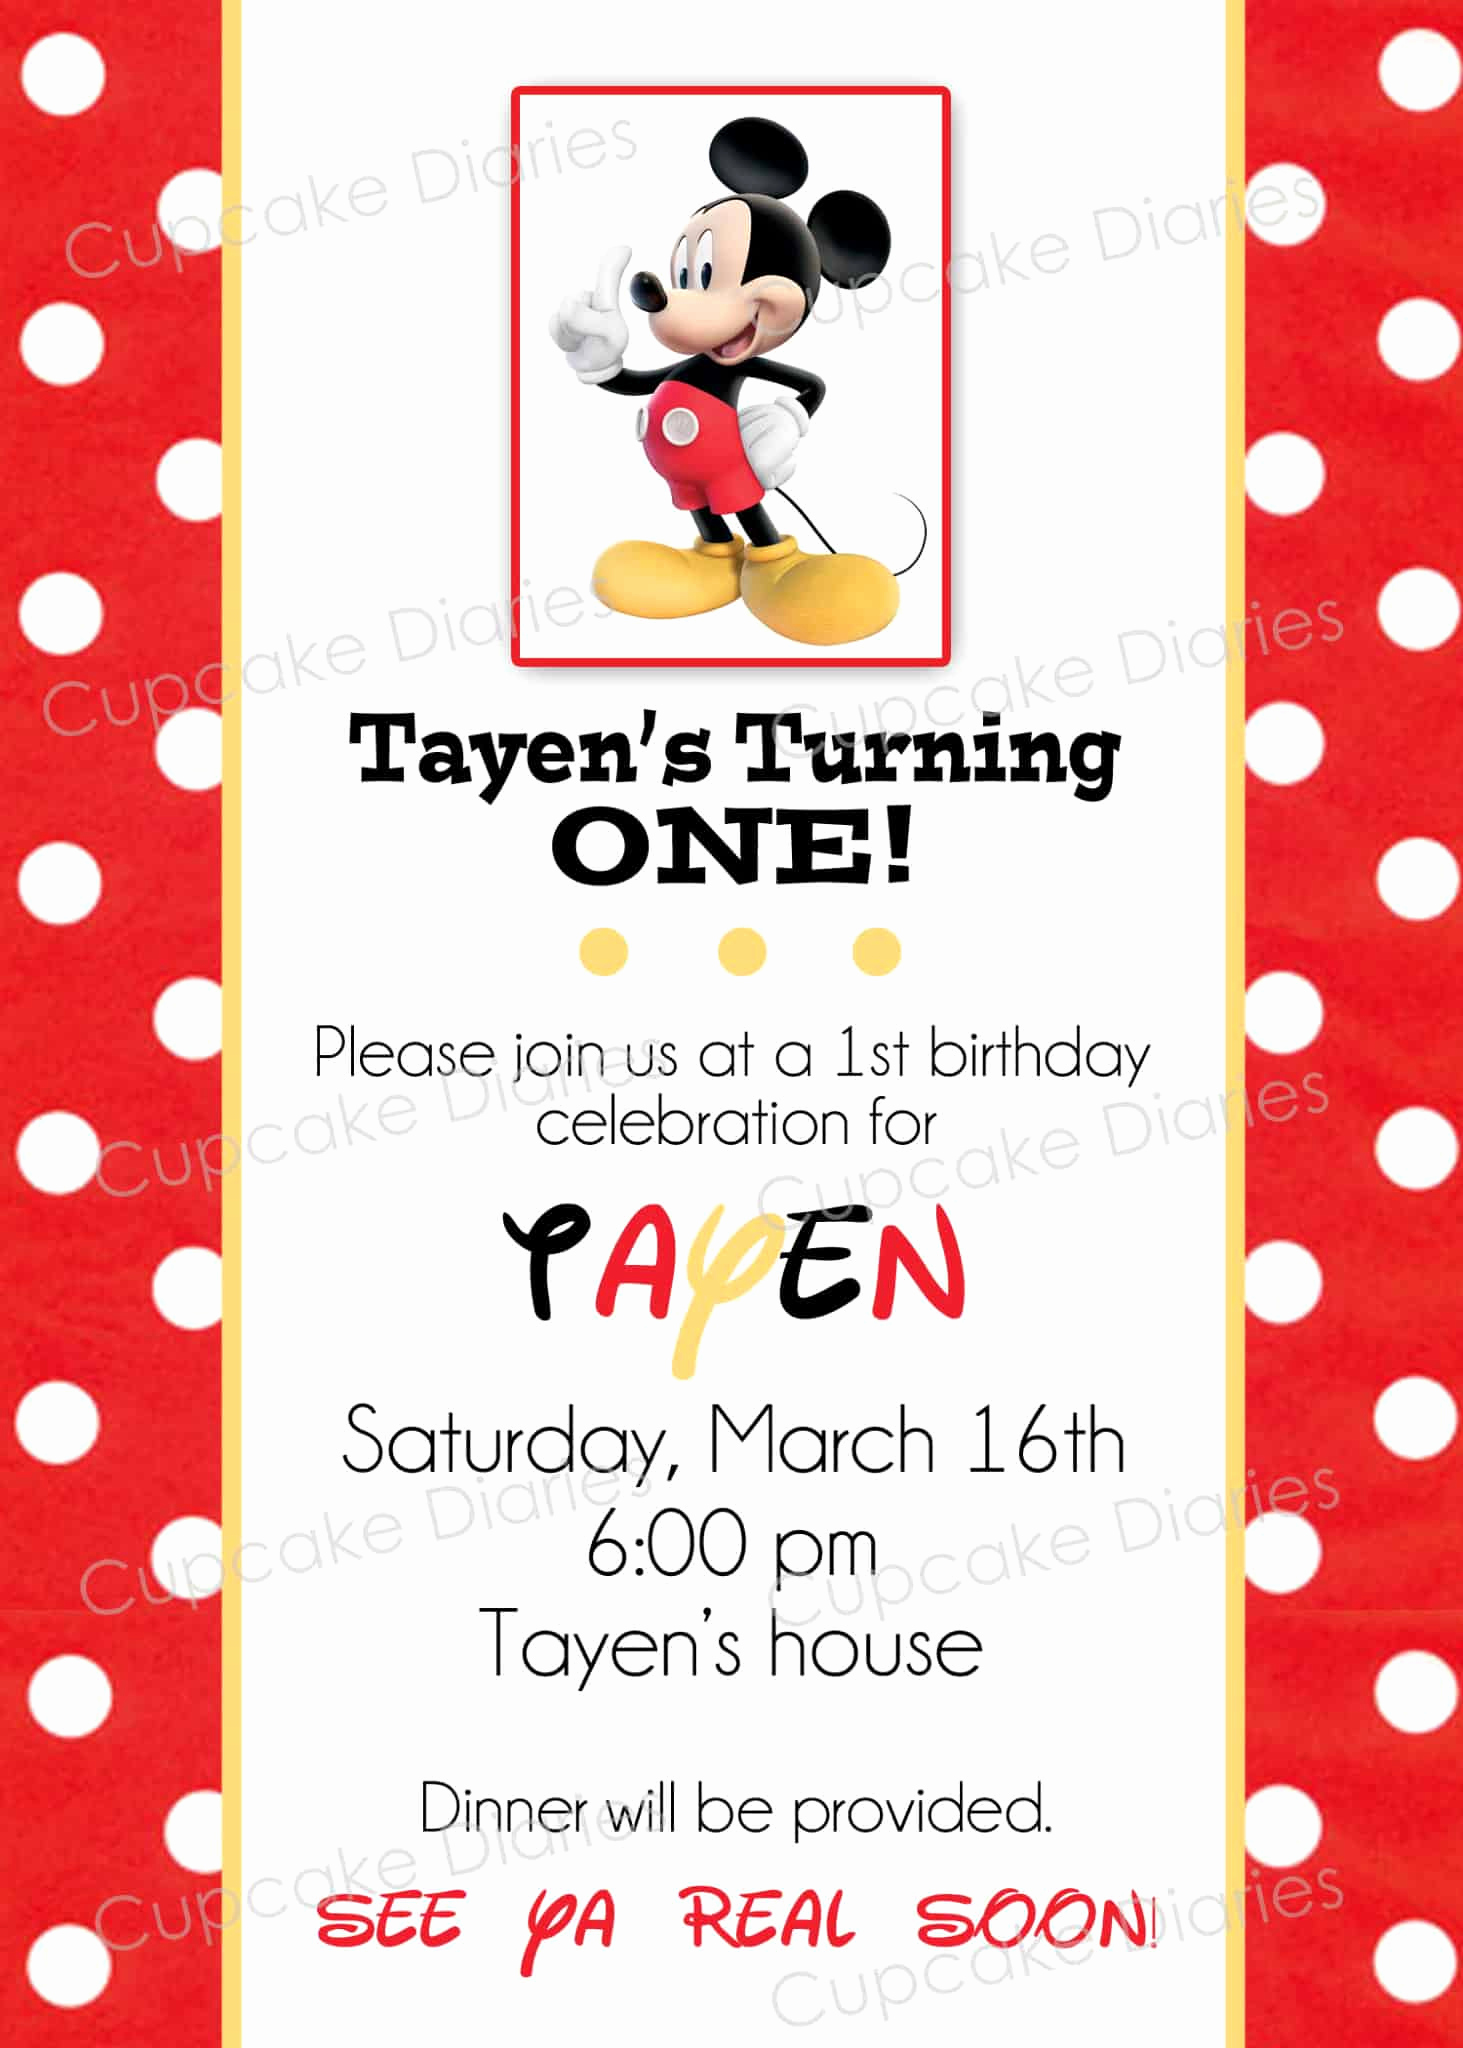 Mickey Mouse Birthday Invites Best Of Simple Mickey Mouse Birthday Party Free Subway Art